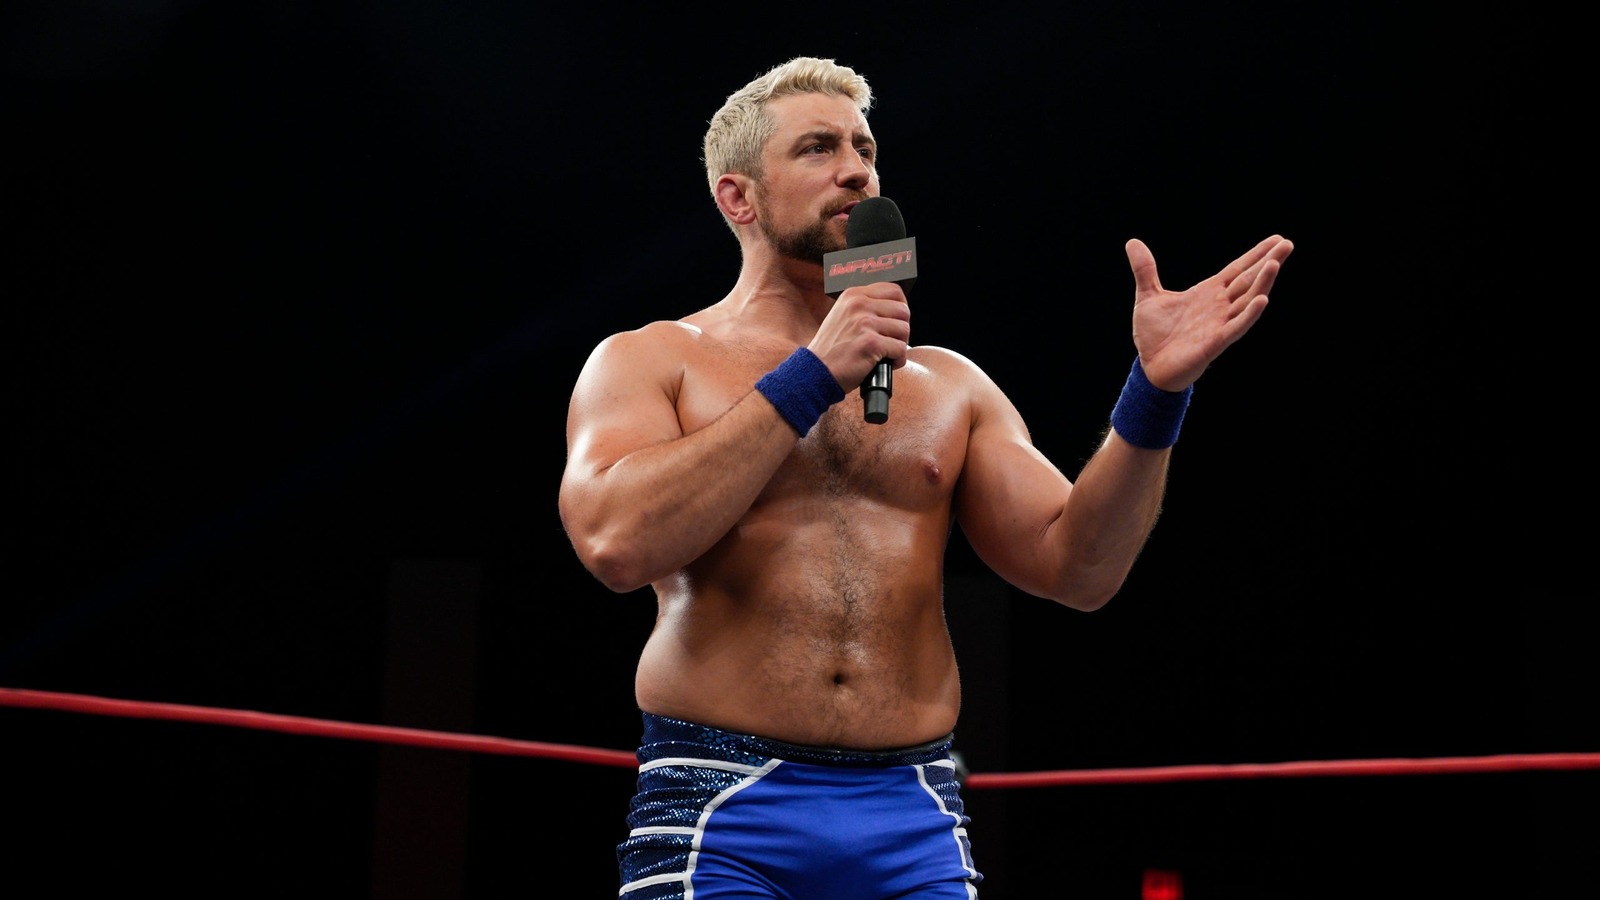 TNA's Joe Hendry Talks Topping The UK Music Charts, Offers To Help Scottish First Minister